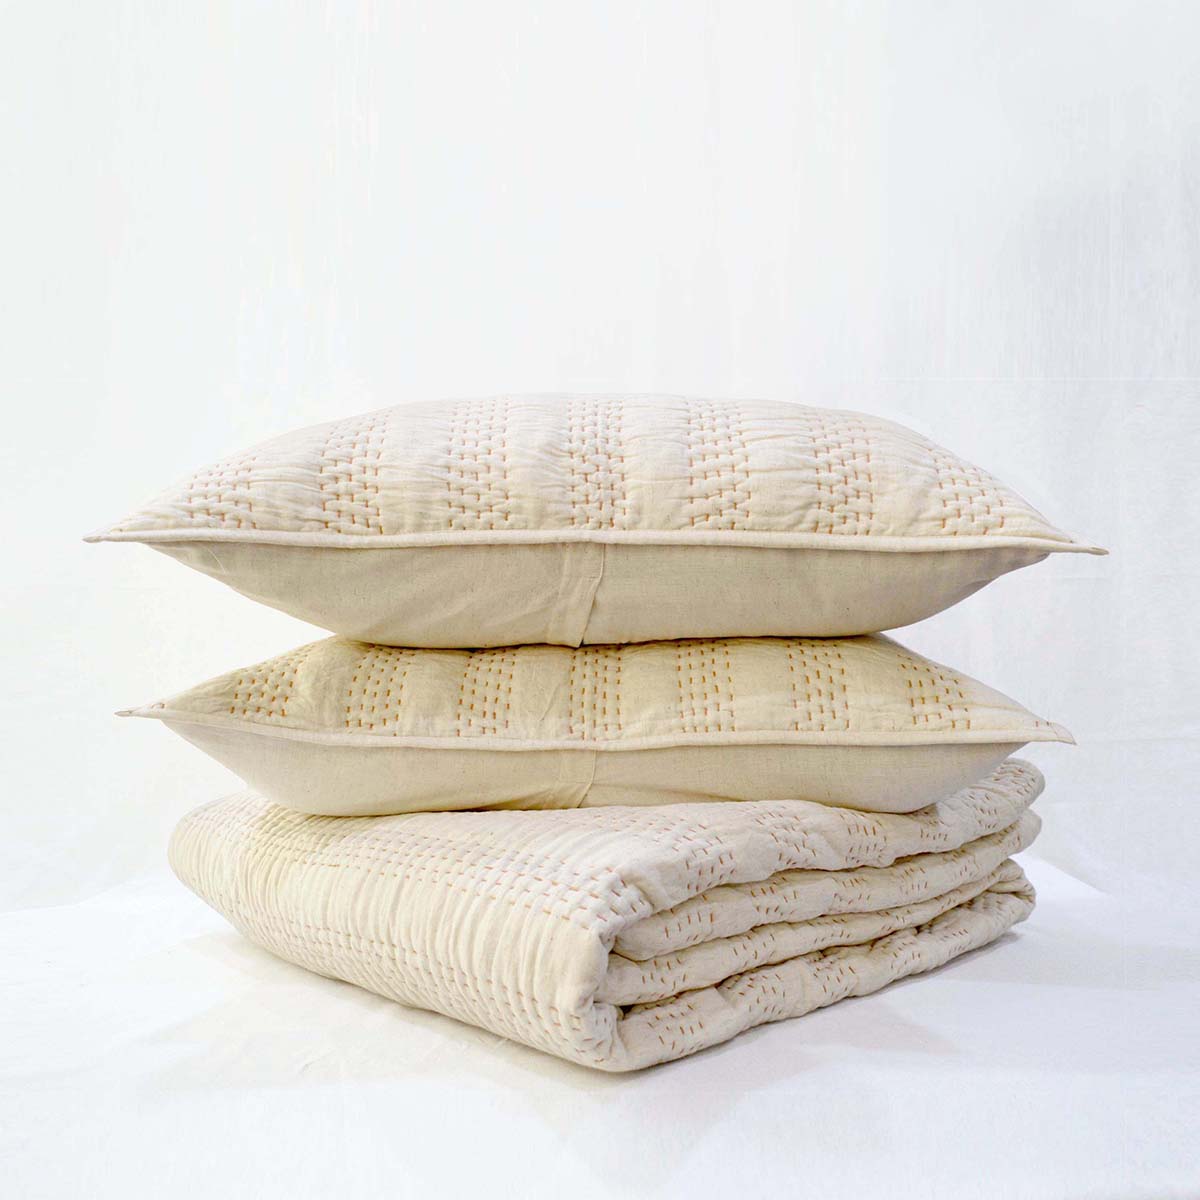 BEIGE cotton linen Quilts and pillow shams with stripe pattern quilting, Sizes available